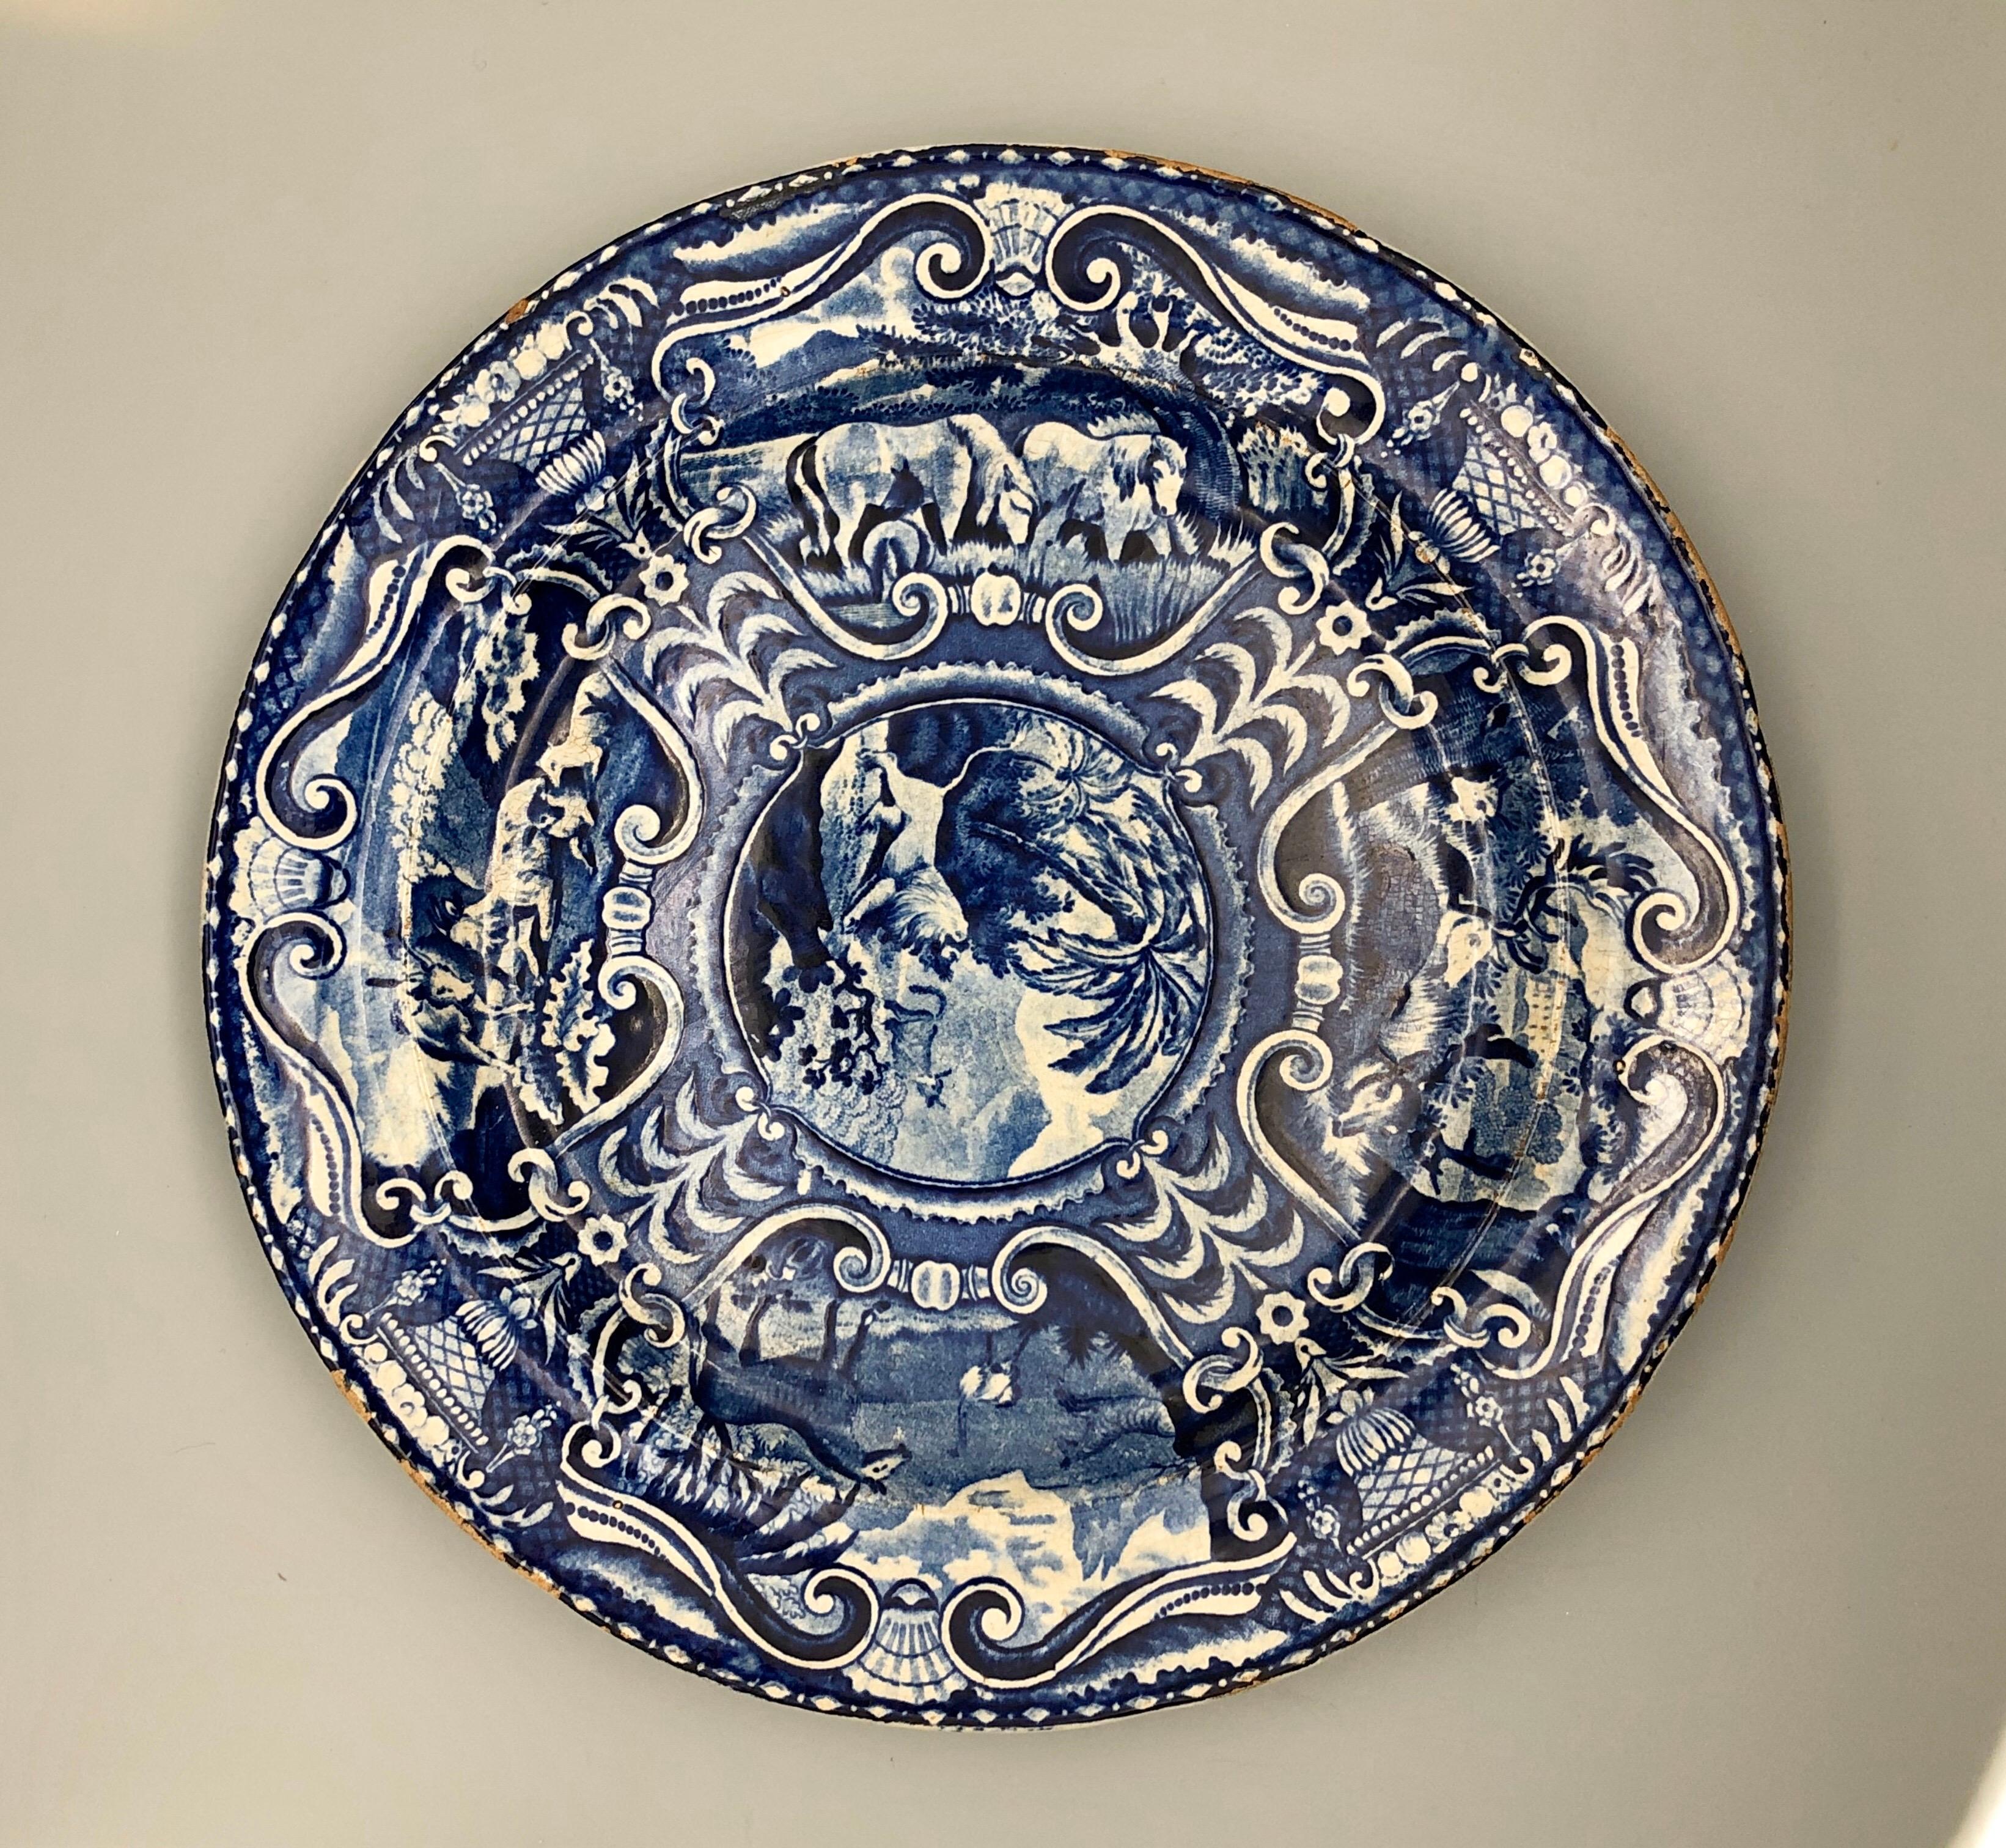 A rare blue and white Quadruped plate produced by brothers John and Ralph hall from 1802-1832. 

The Quadrupeds series is renowned for its animal images in various combinations. This eye-catching plate measures 10 x 10 x .75 inches deep and weighs